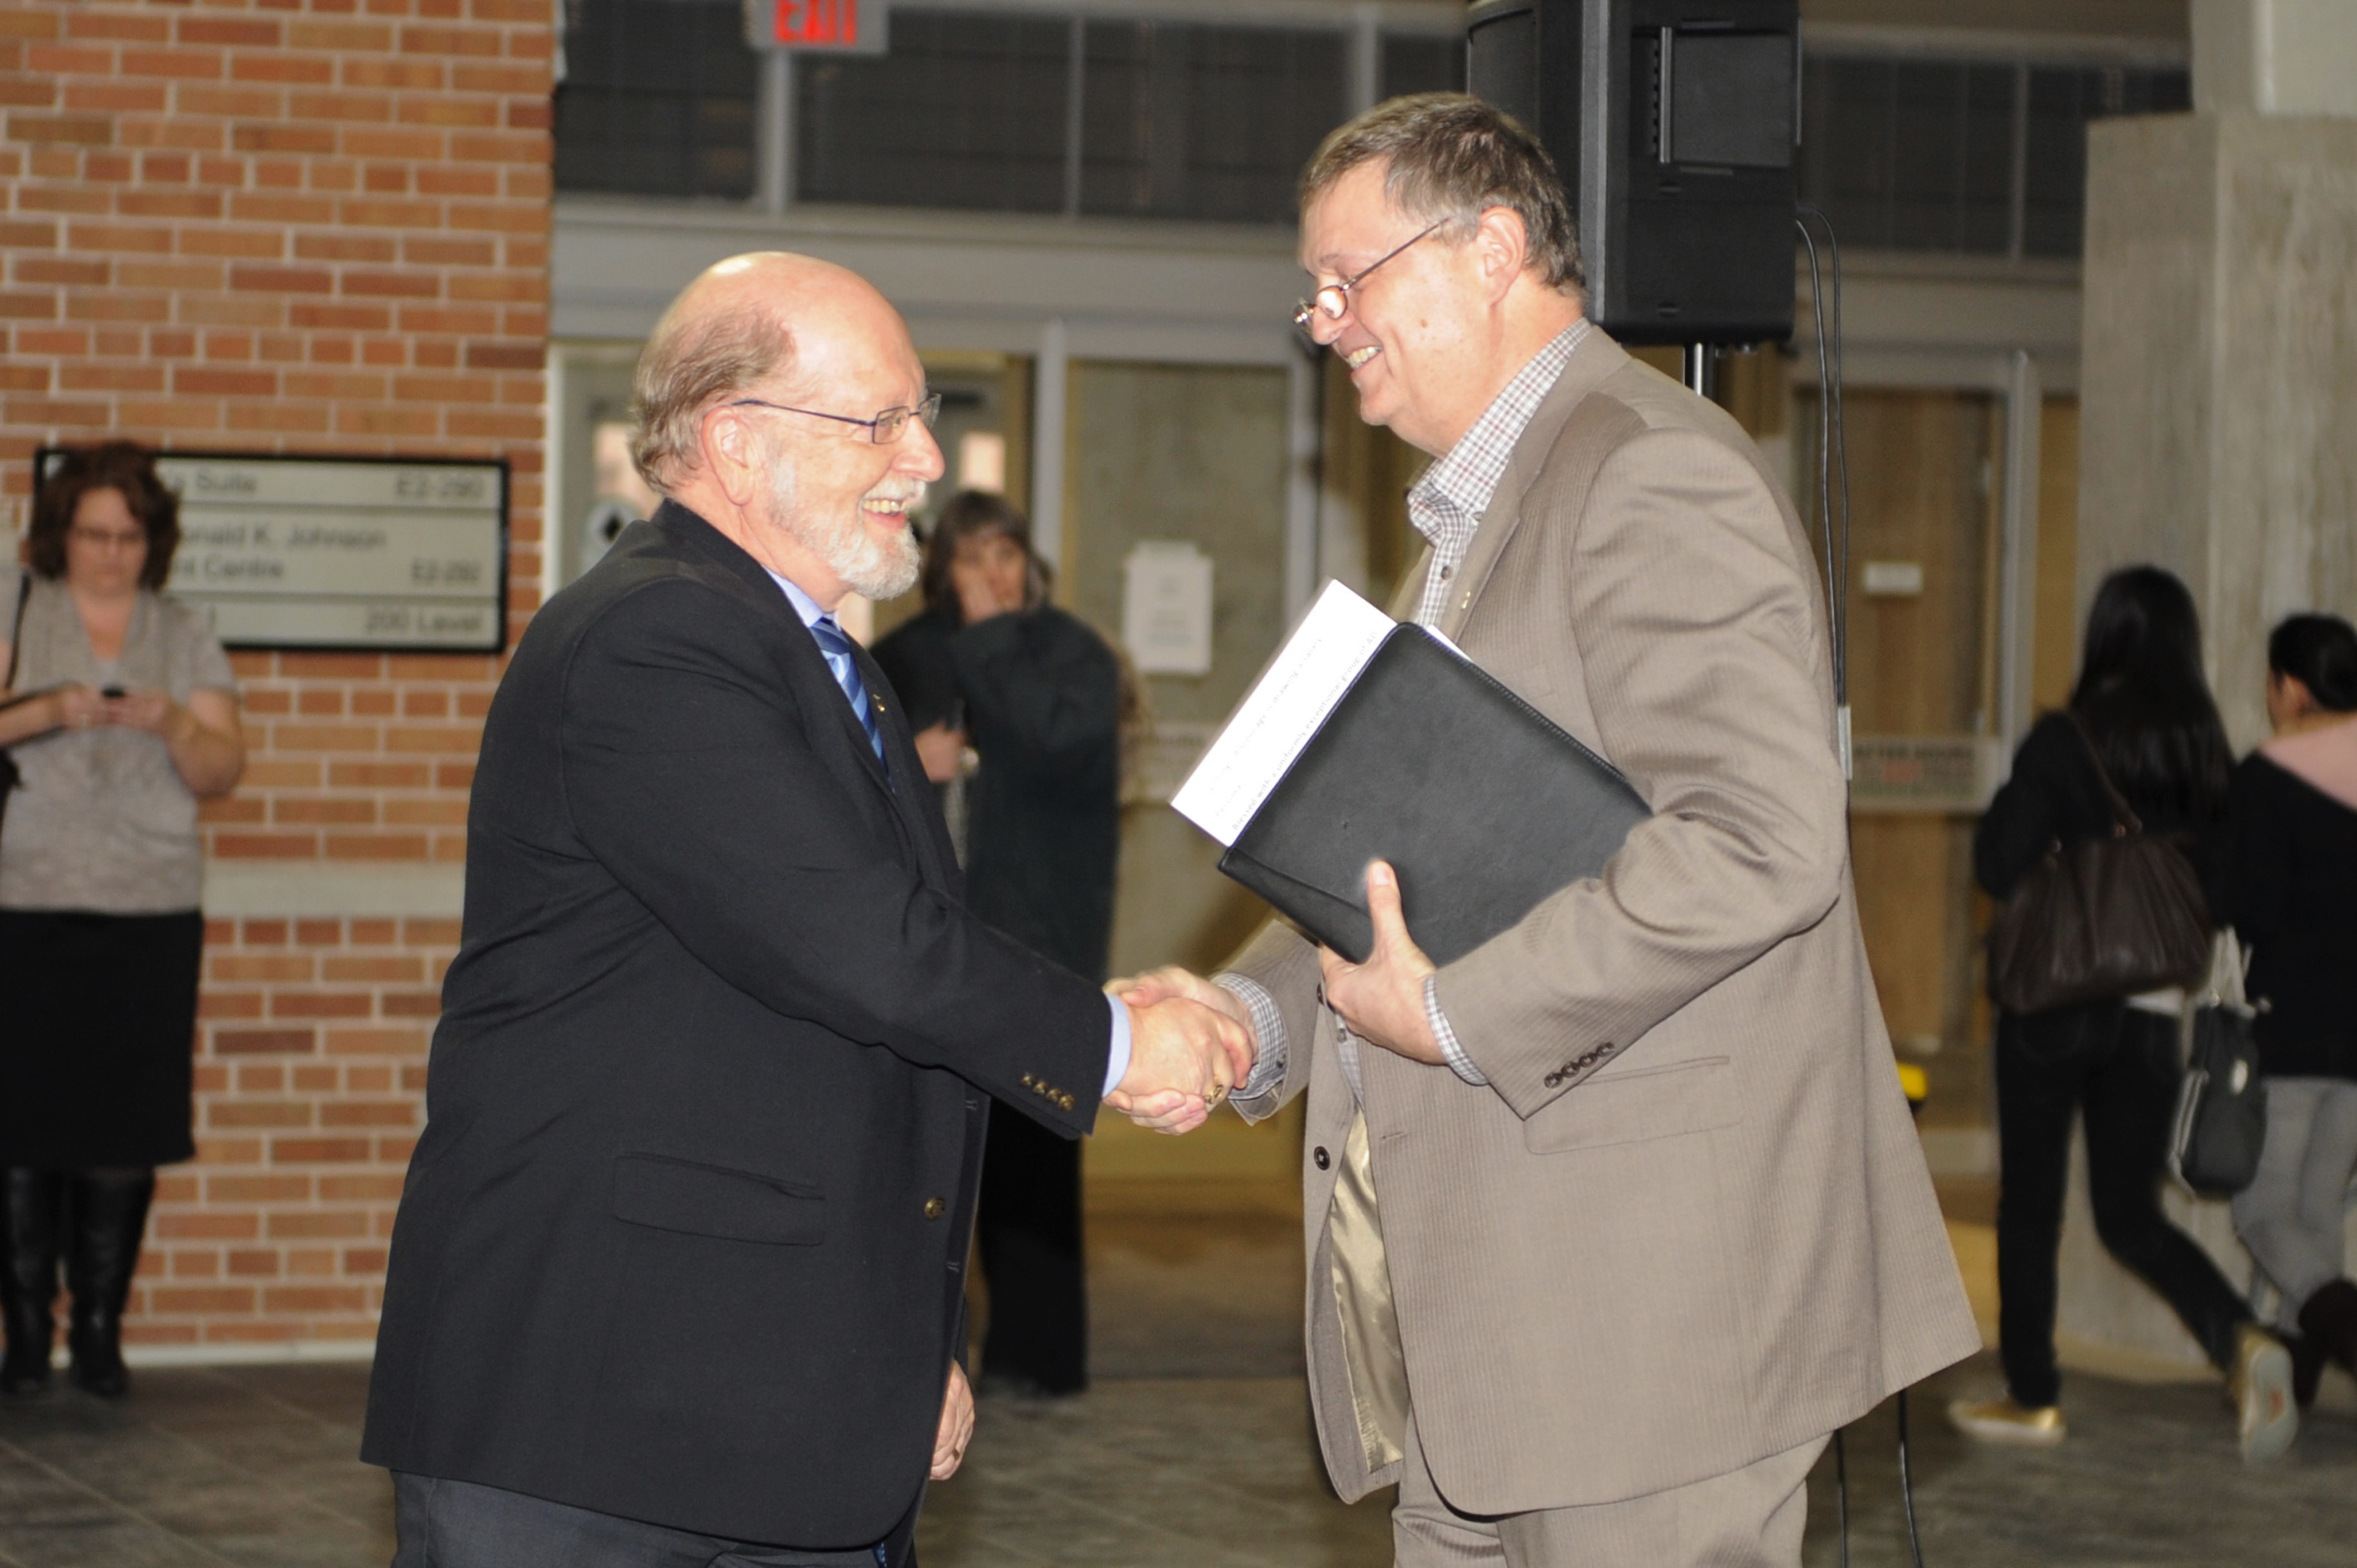 Alt: Doug Ruth shakes hands with Ron Britton in candid photo.